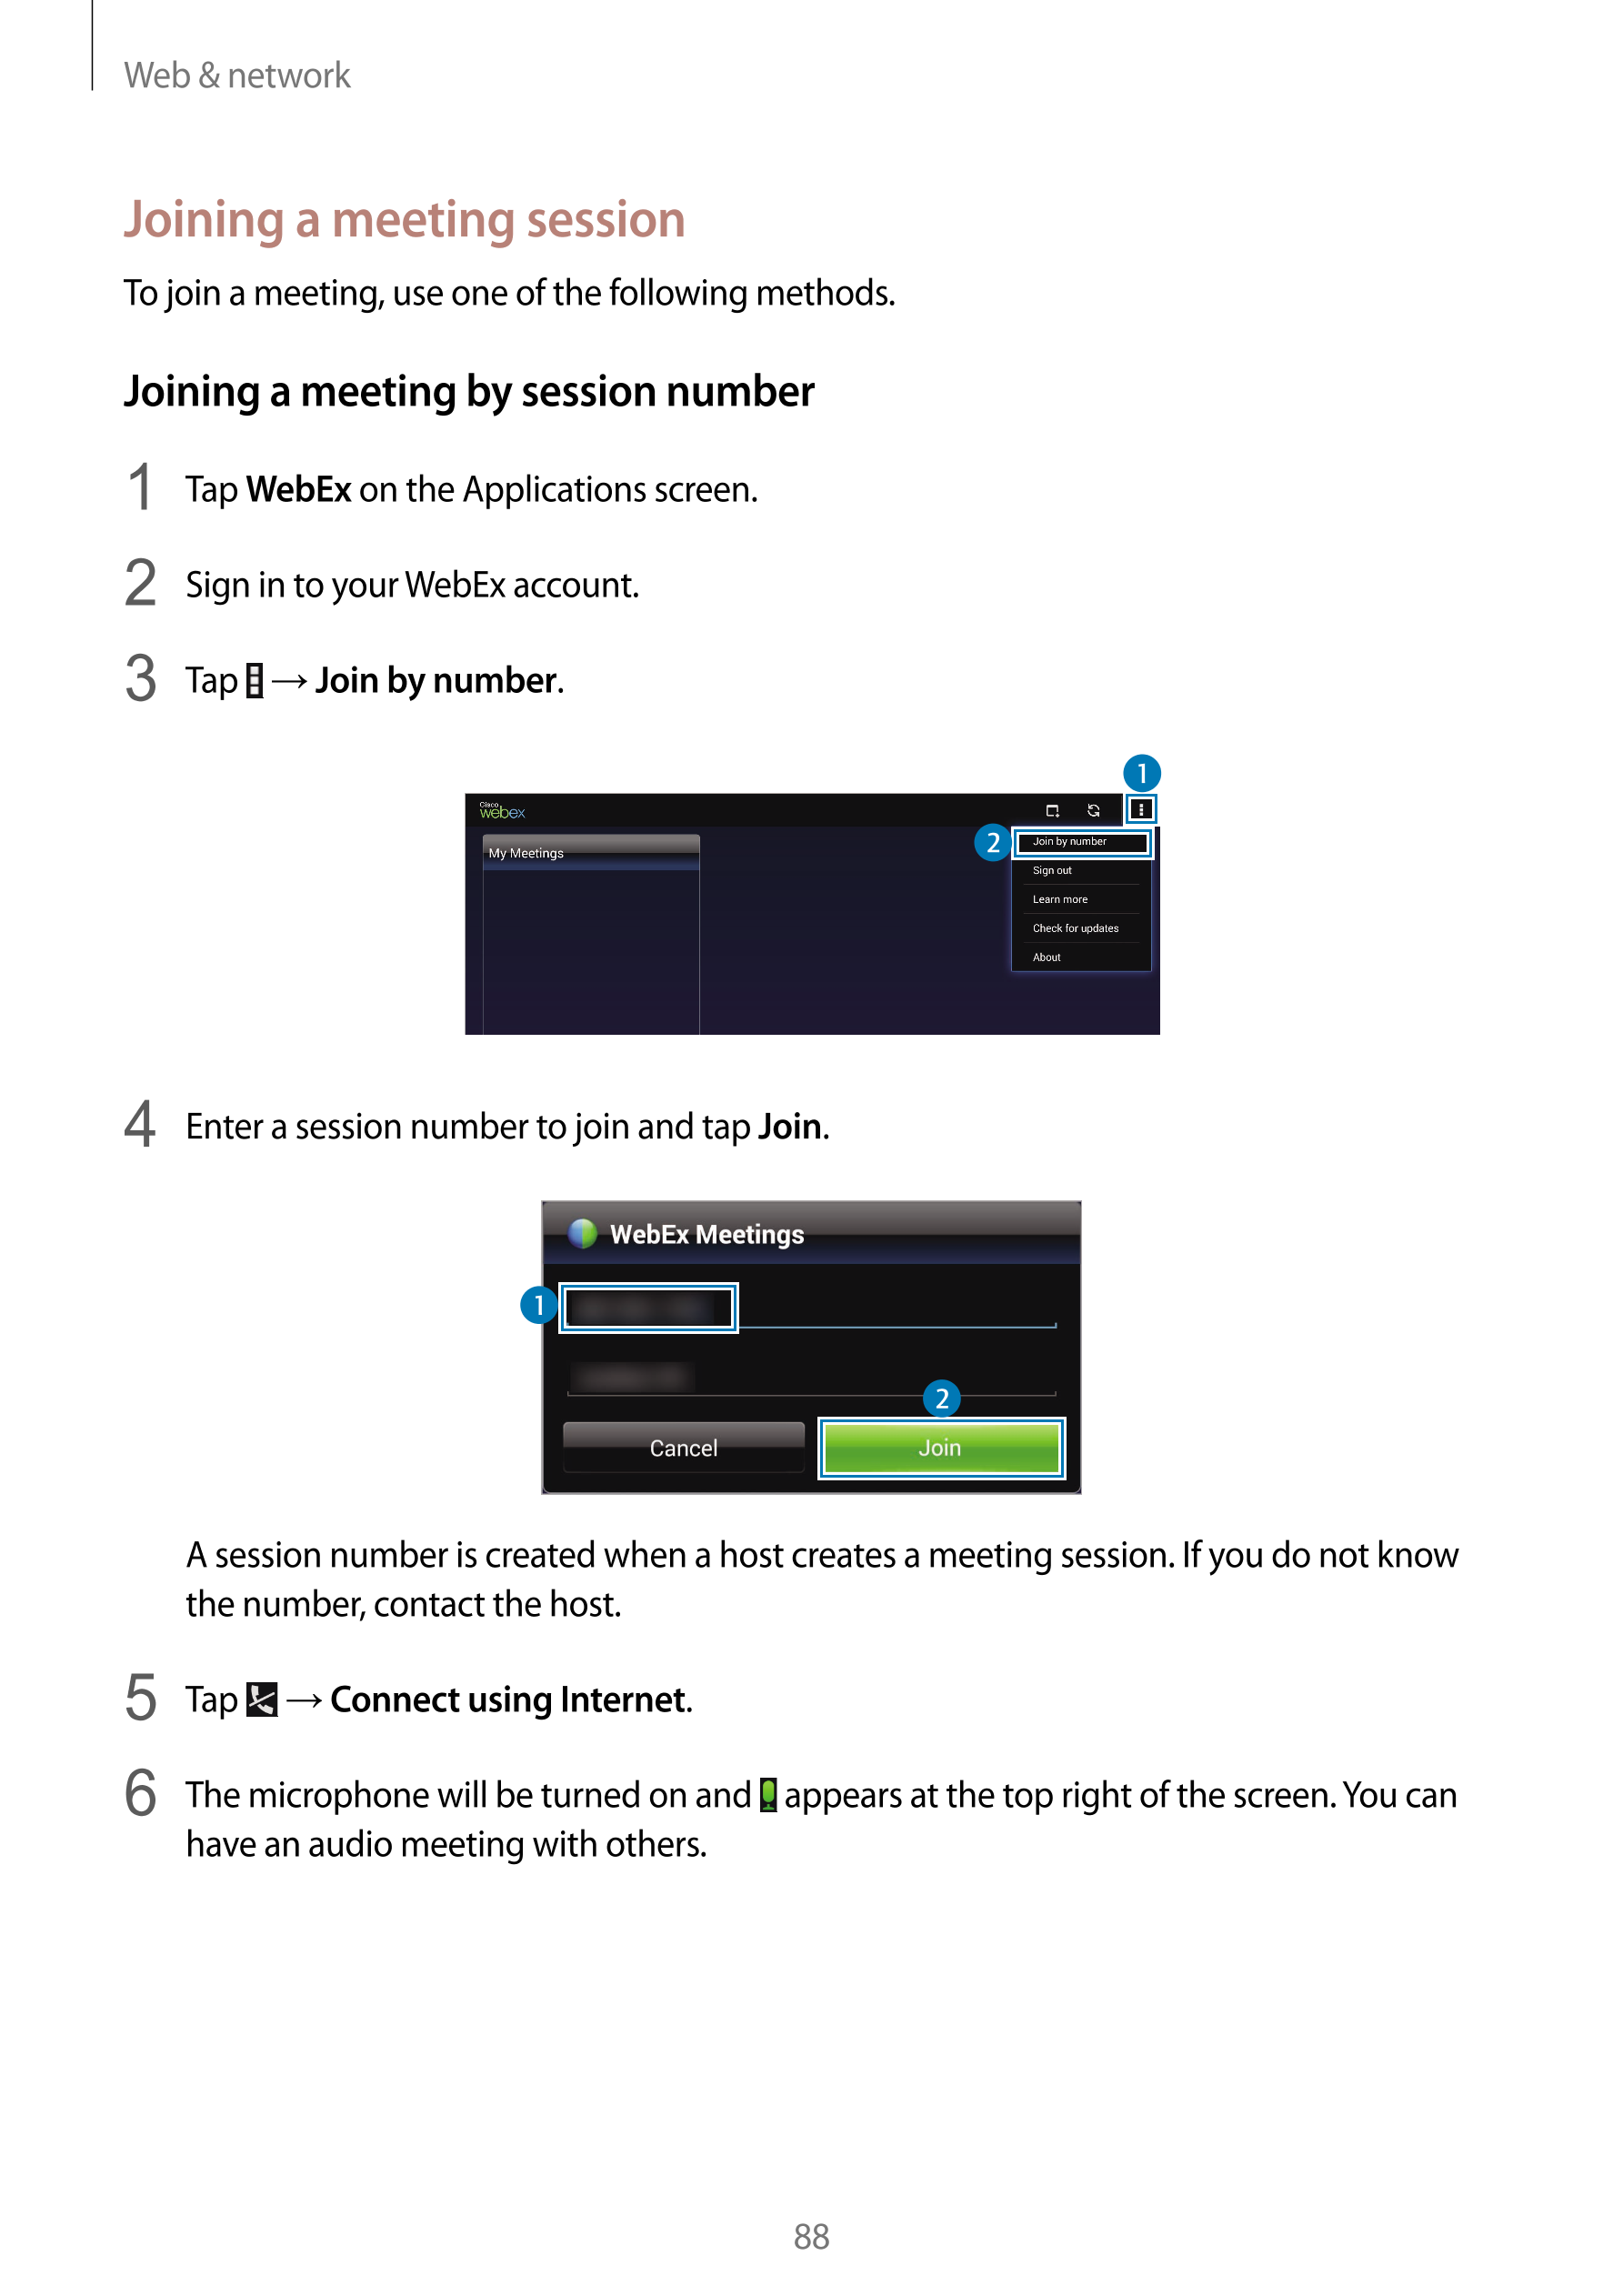 Web & network
Joining a meeting session
To join a meeting, use one of the following methods.
Joining a meeting by session number